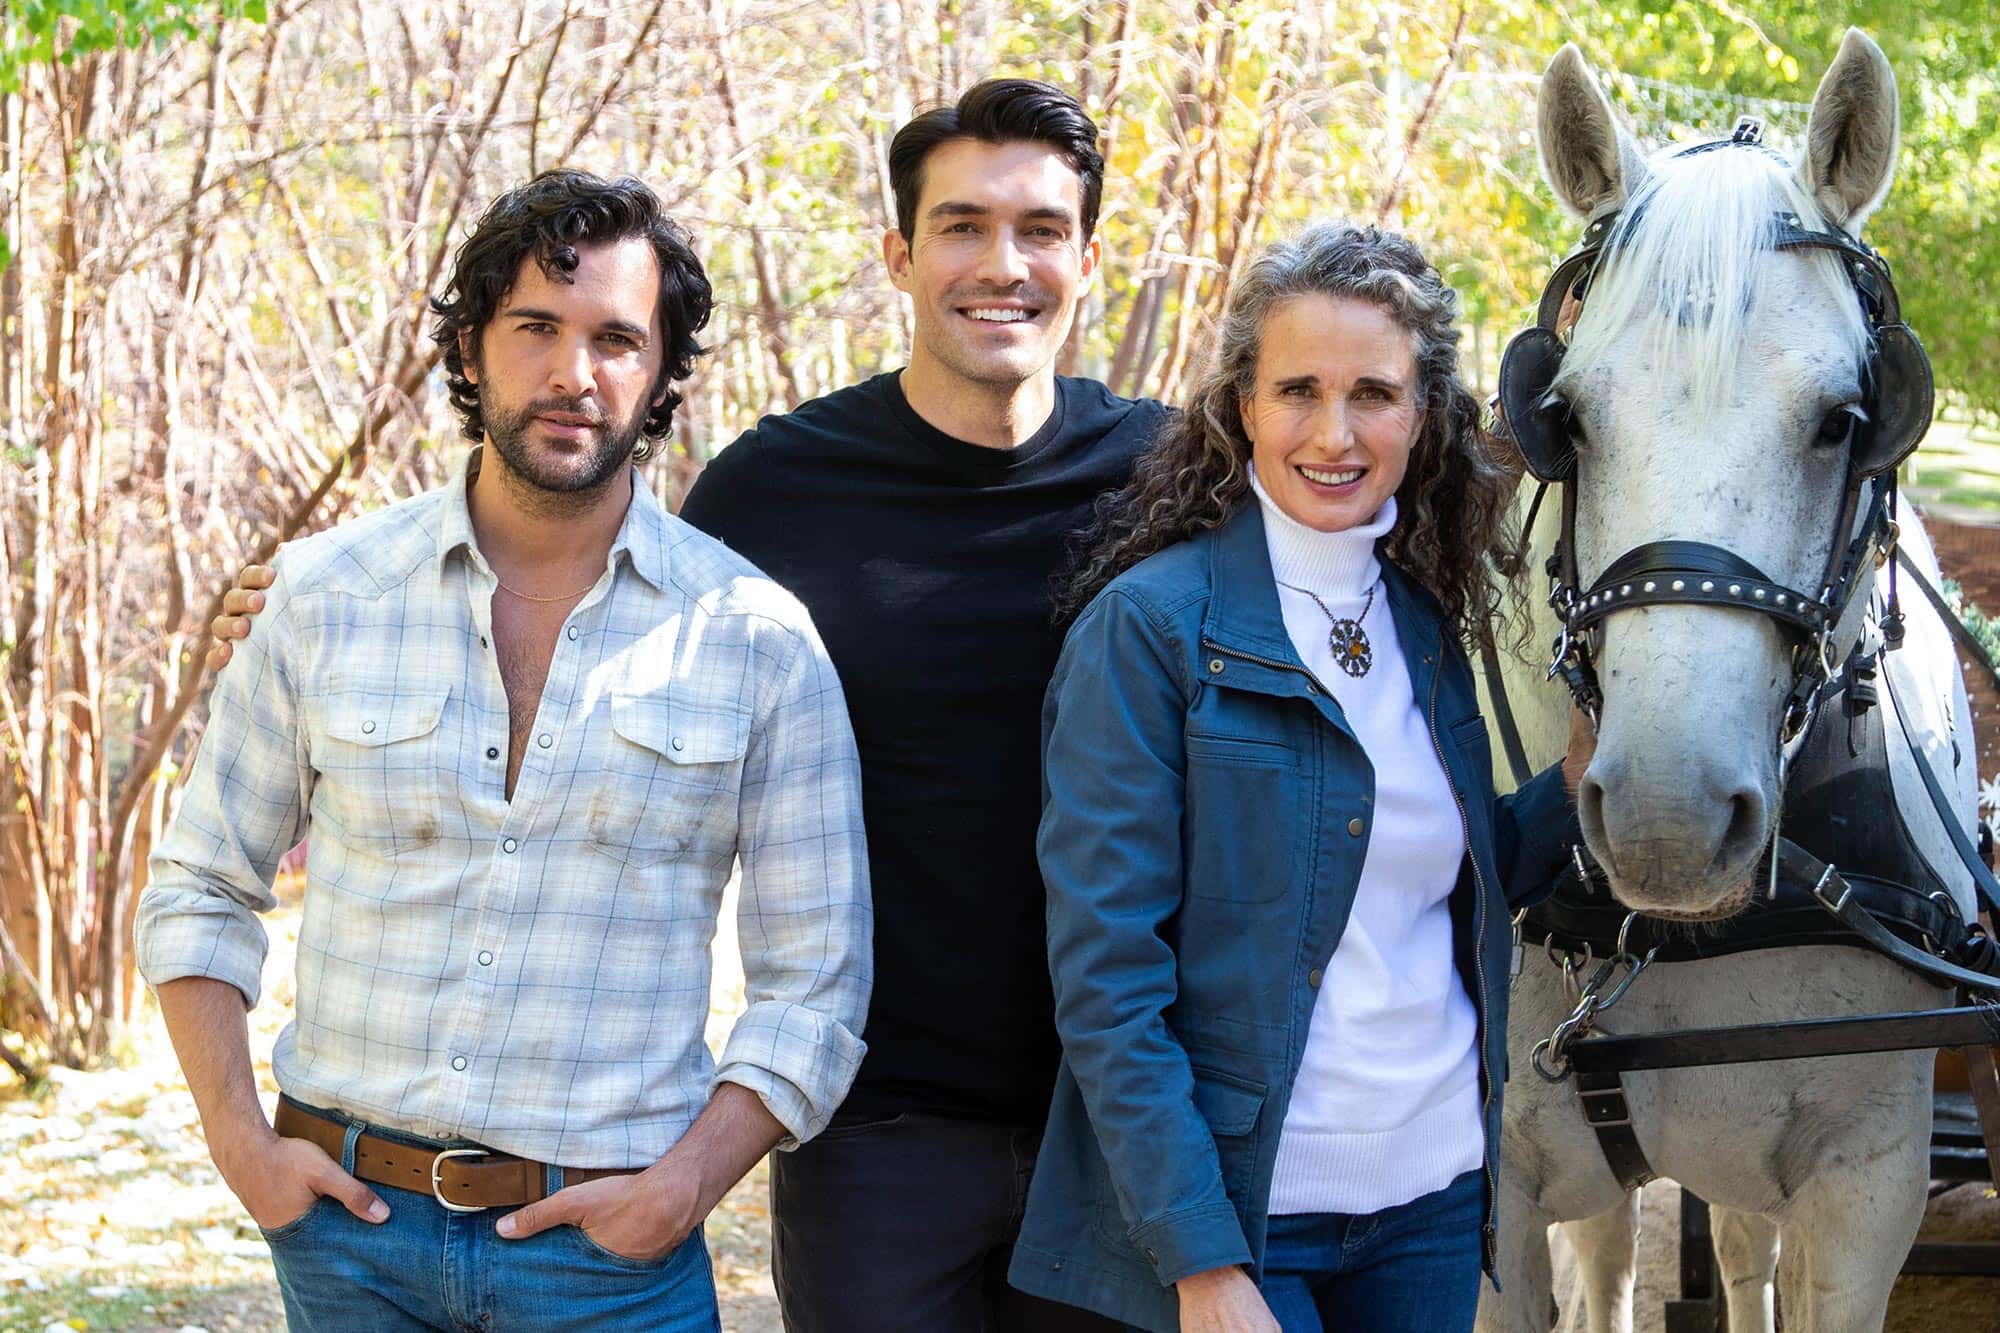 Trailer released for gay cowboy holiday film ‘Dashing in December’